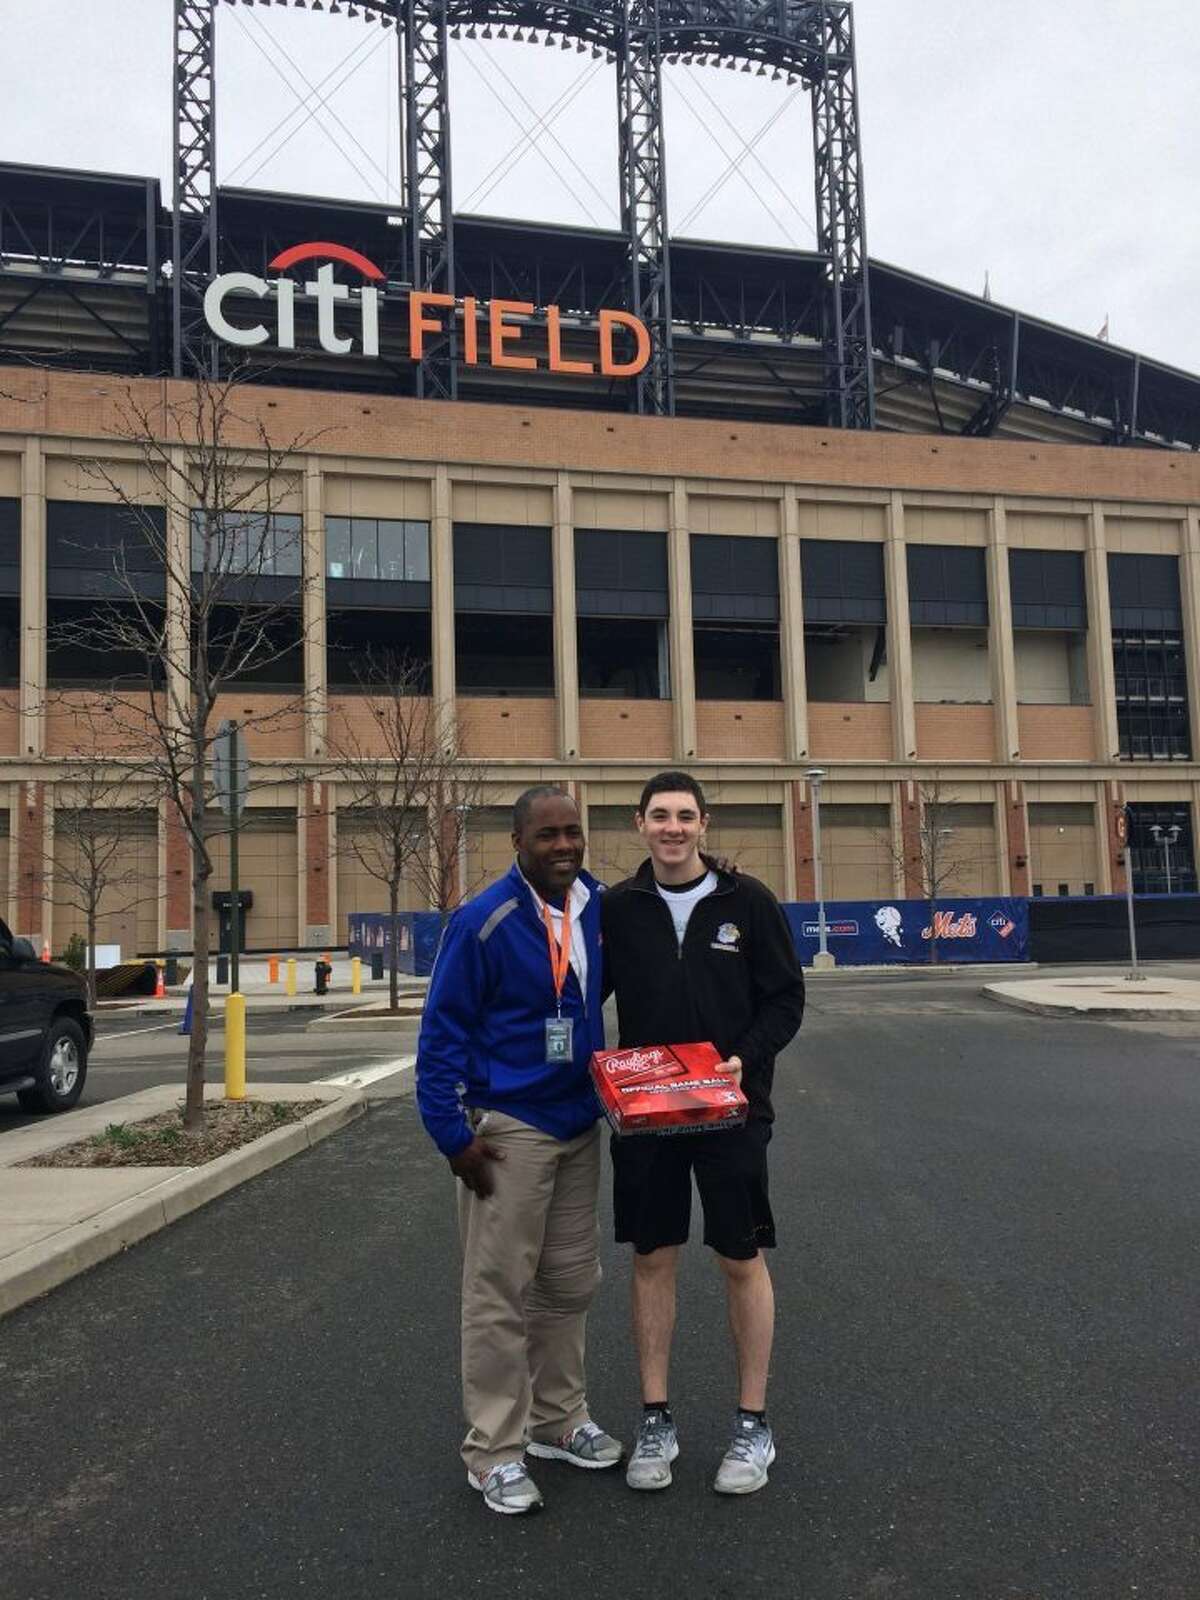 Trumbull resident Connor Bailo stands outside of Citi Field in Queens, New York after receiving donated baseballs from the New York Mets. Bailo, the CEO and founder of Baseballs 4 A Better Community, is partnering with Major League Baseball’s Reviving Baseball in Inner Cities program to help children from underprivileged backgrounds.